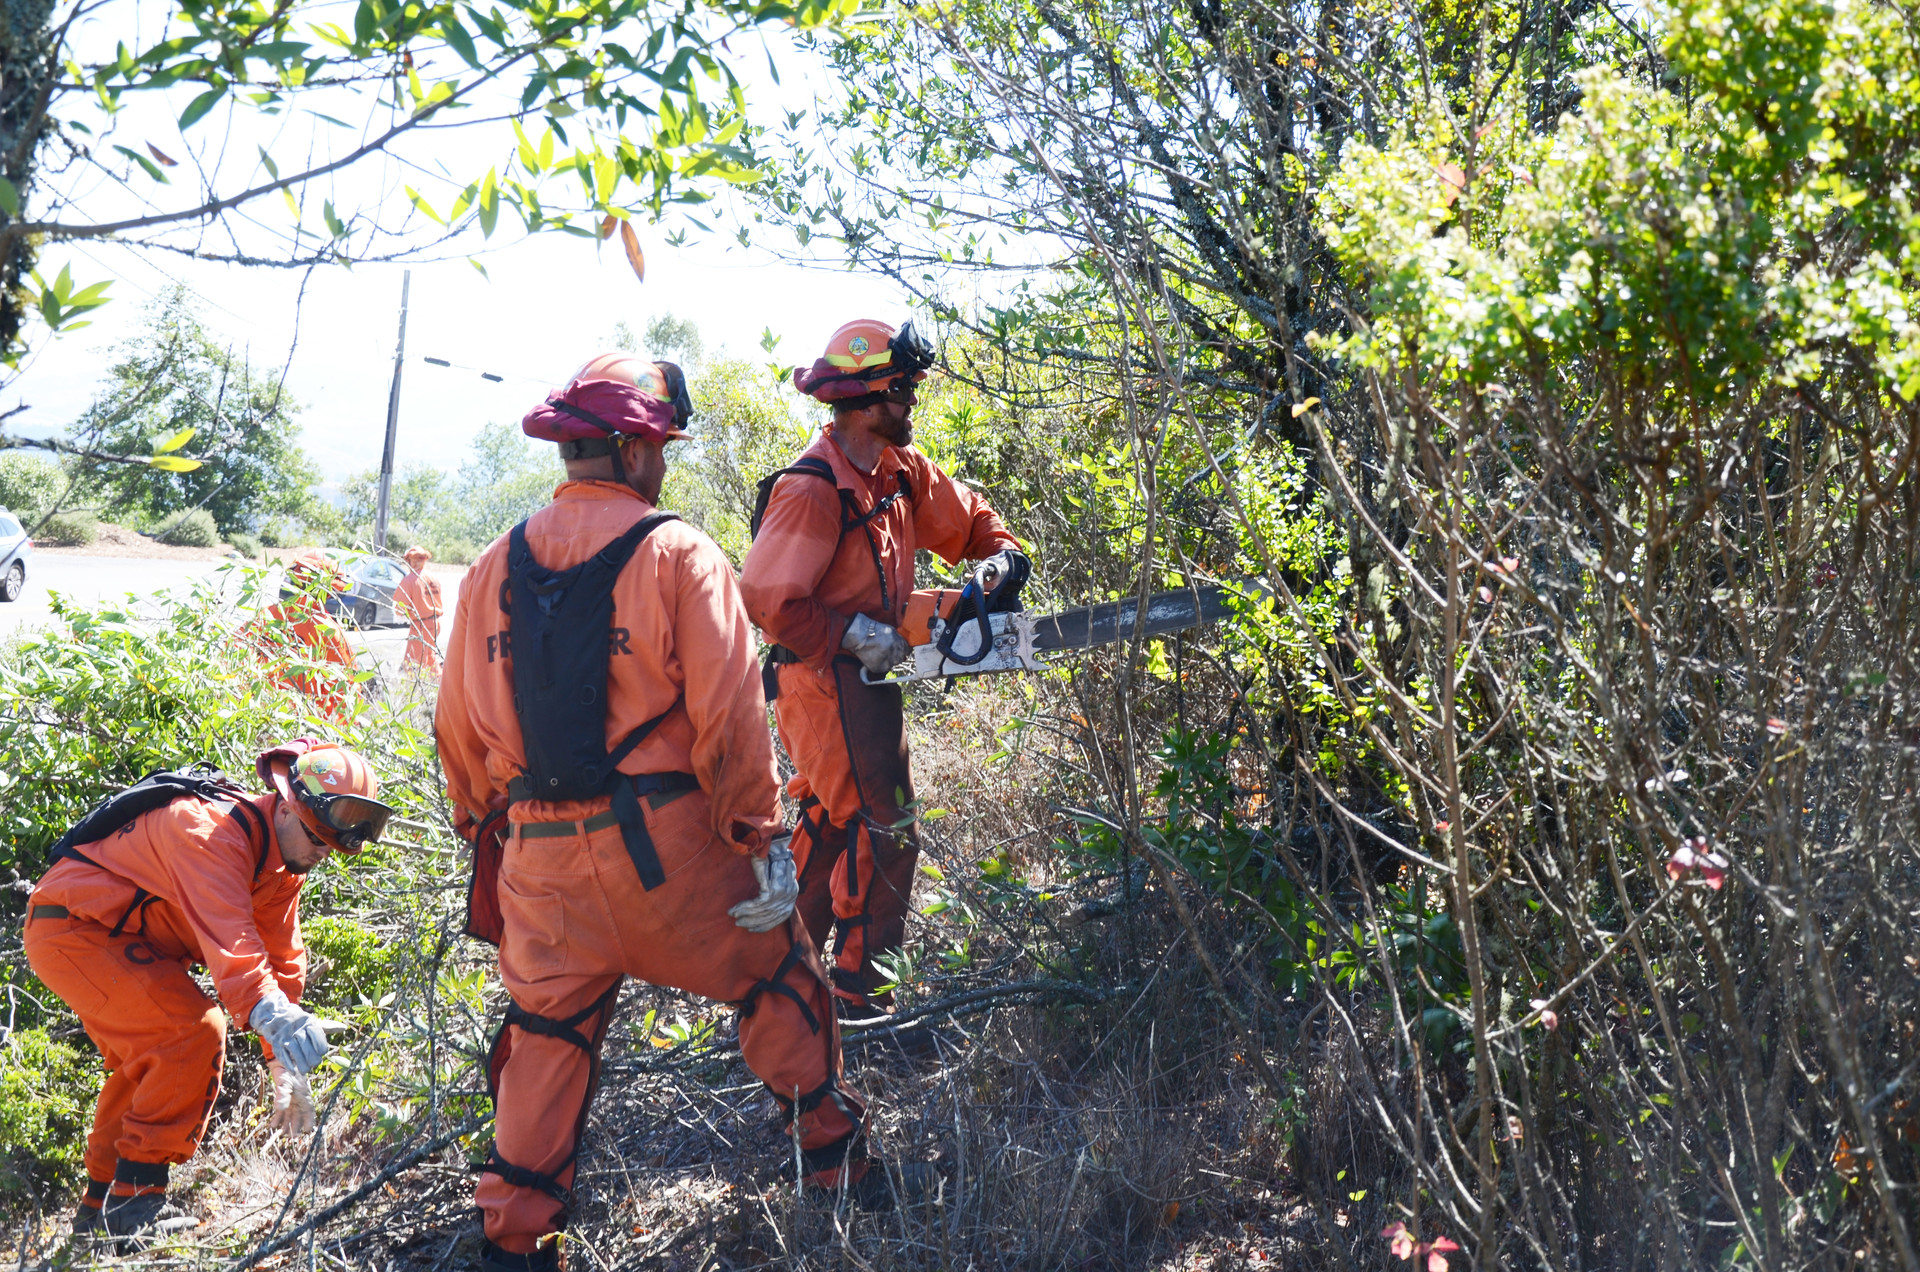 Inmate firefighters clear brush from a roadside in the Berkeley Hills near Tilden Regional Park on Tuesday, Sept. 26, 2017. Fire officials say fuel reduction projects like this are critical to preventing major wildfires.